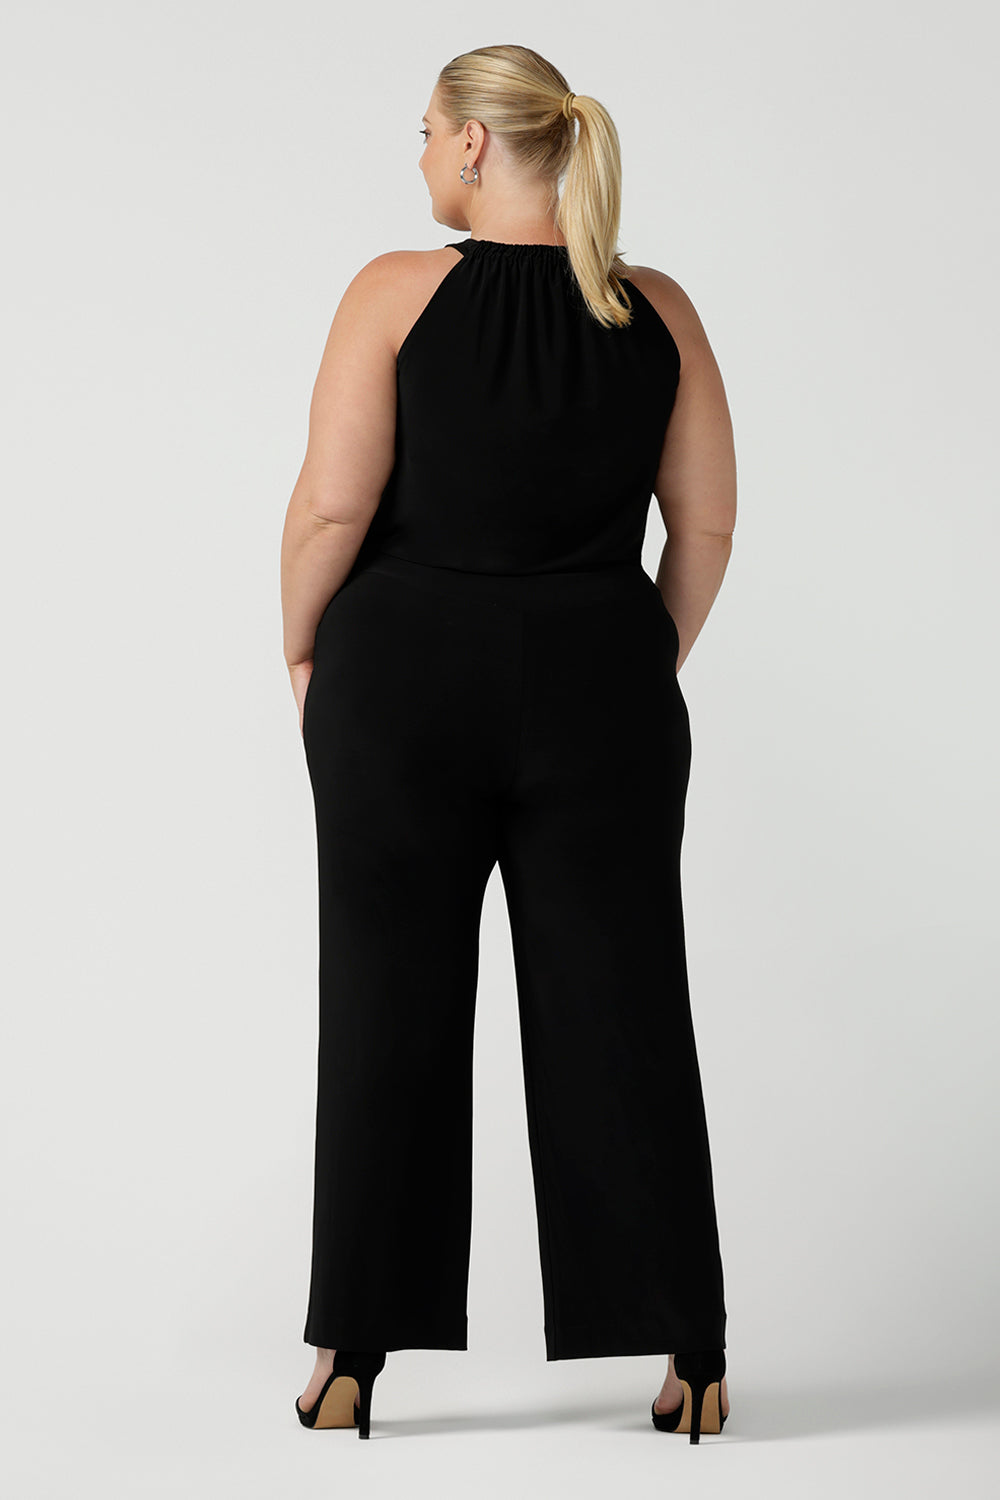 Back view of womens plus size 18 women wears jumpsuit for curvy women. This black jumpsuit features a halter neck with side pockets and straight legs. Made in Australia in navy stretch jersey this jumpsuit is comfortable for work or weekend wear.  